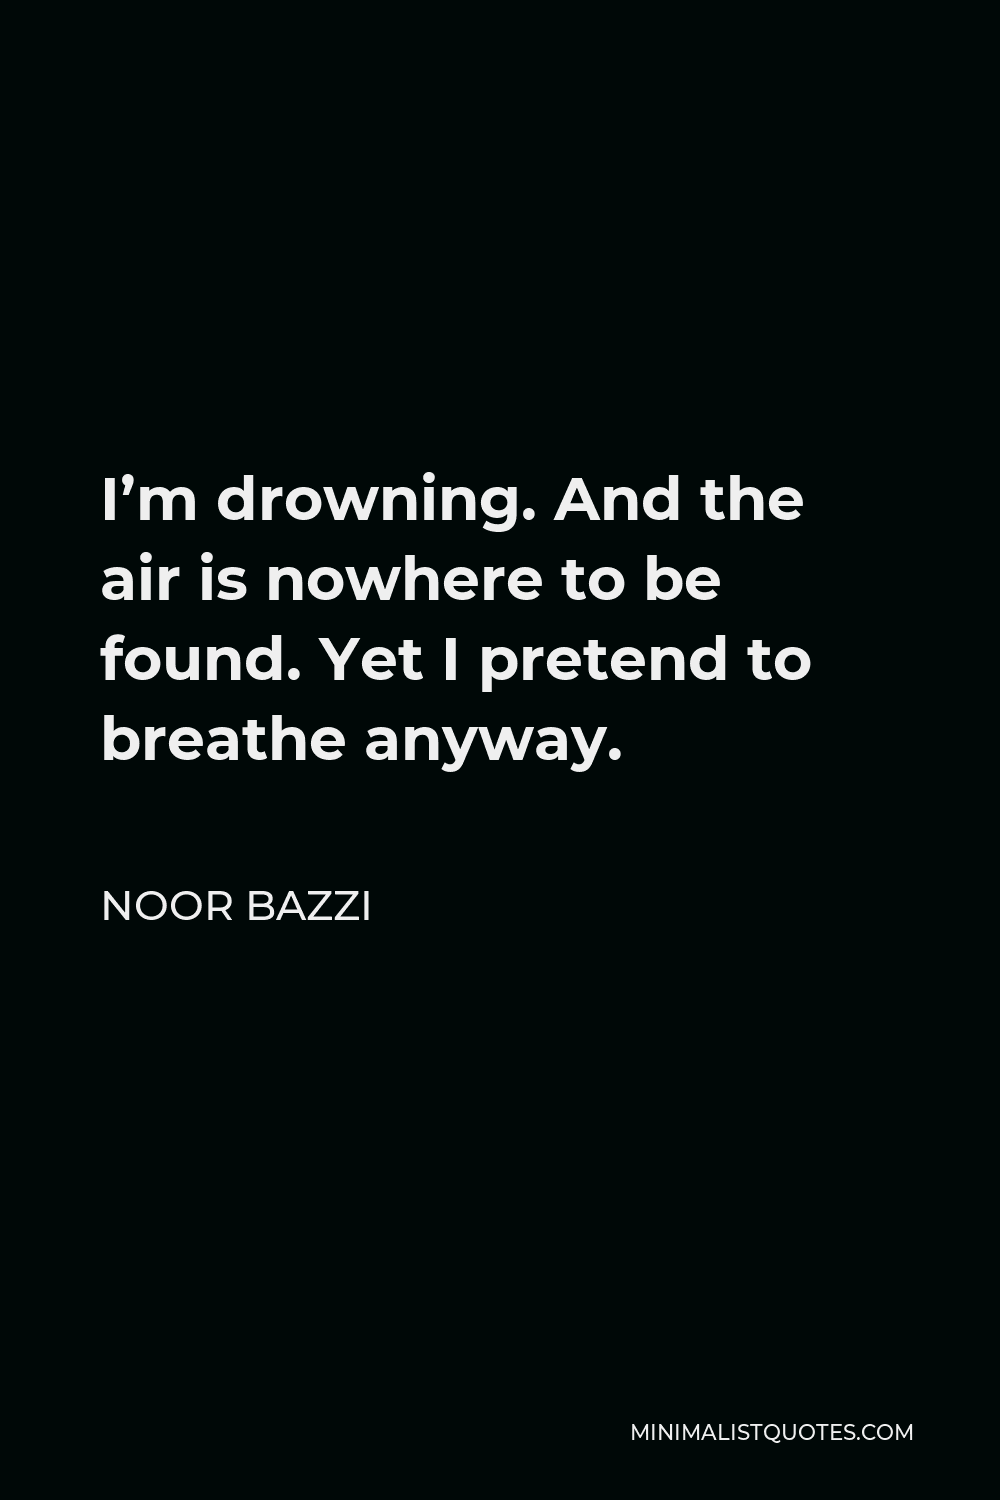 Noor Bazzi Quote - I’m drowning. And the air is nowhere to be found. Yet I pretend to breathe anyway.